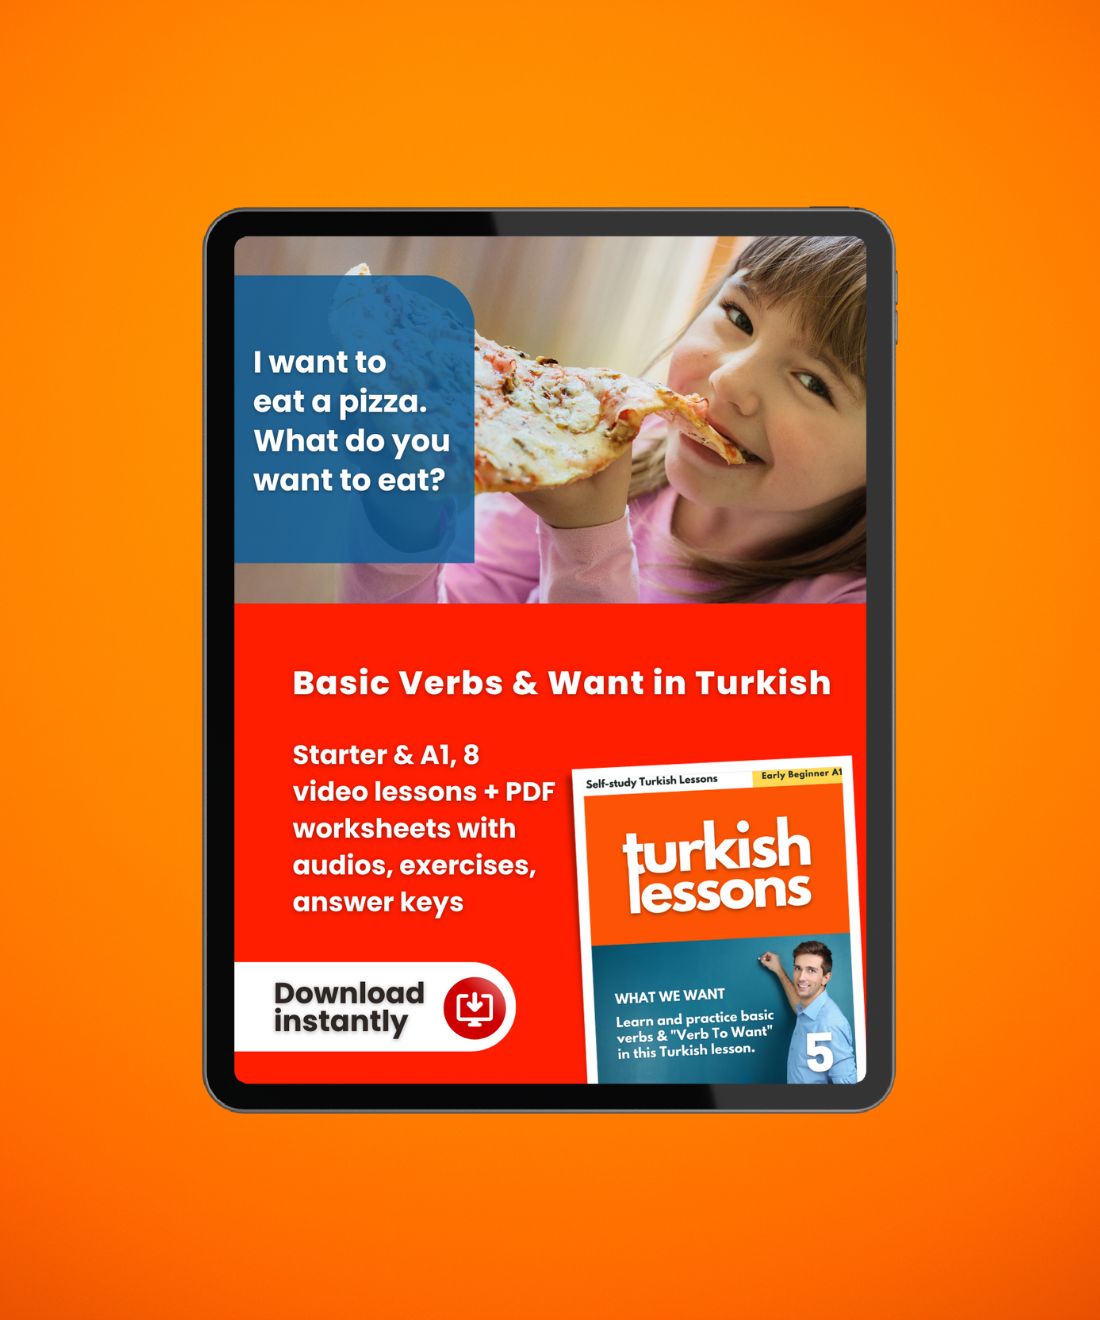 turkish lessons a1 - basic verbs and want in turkish language